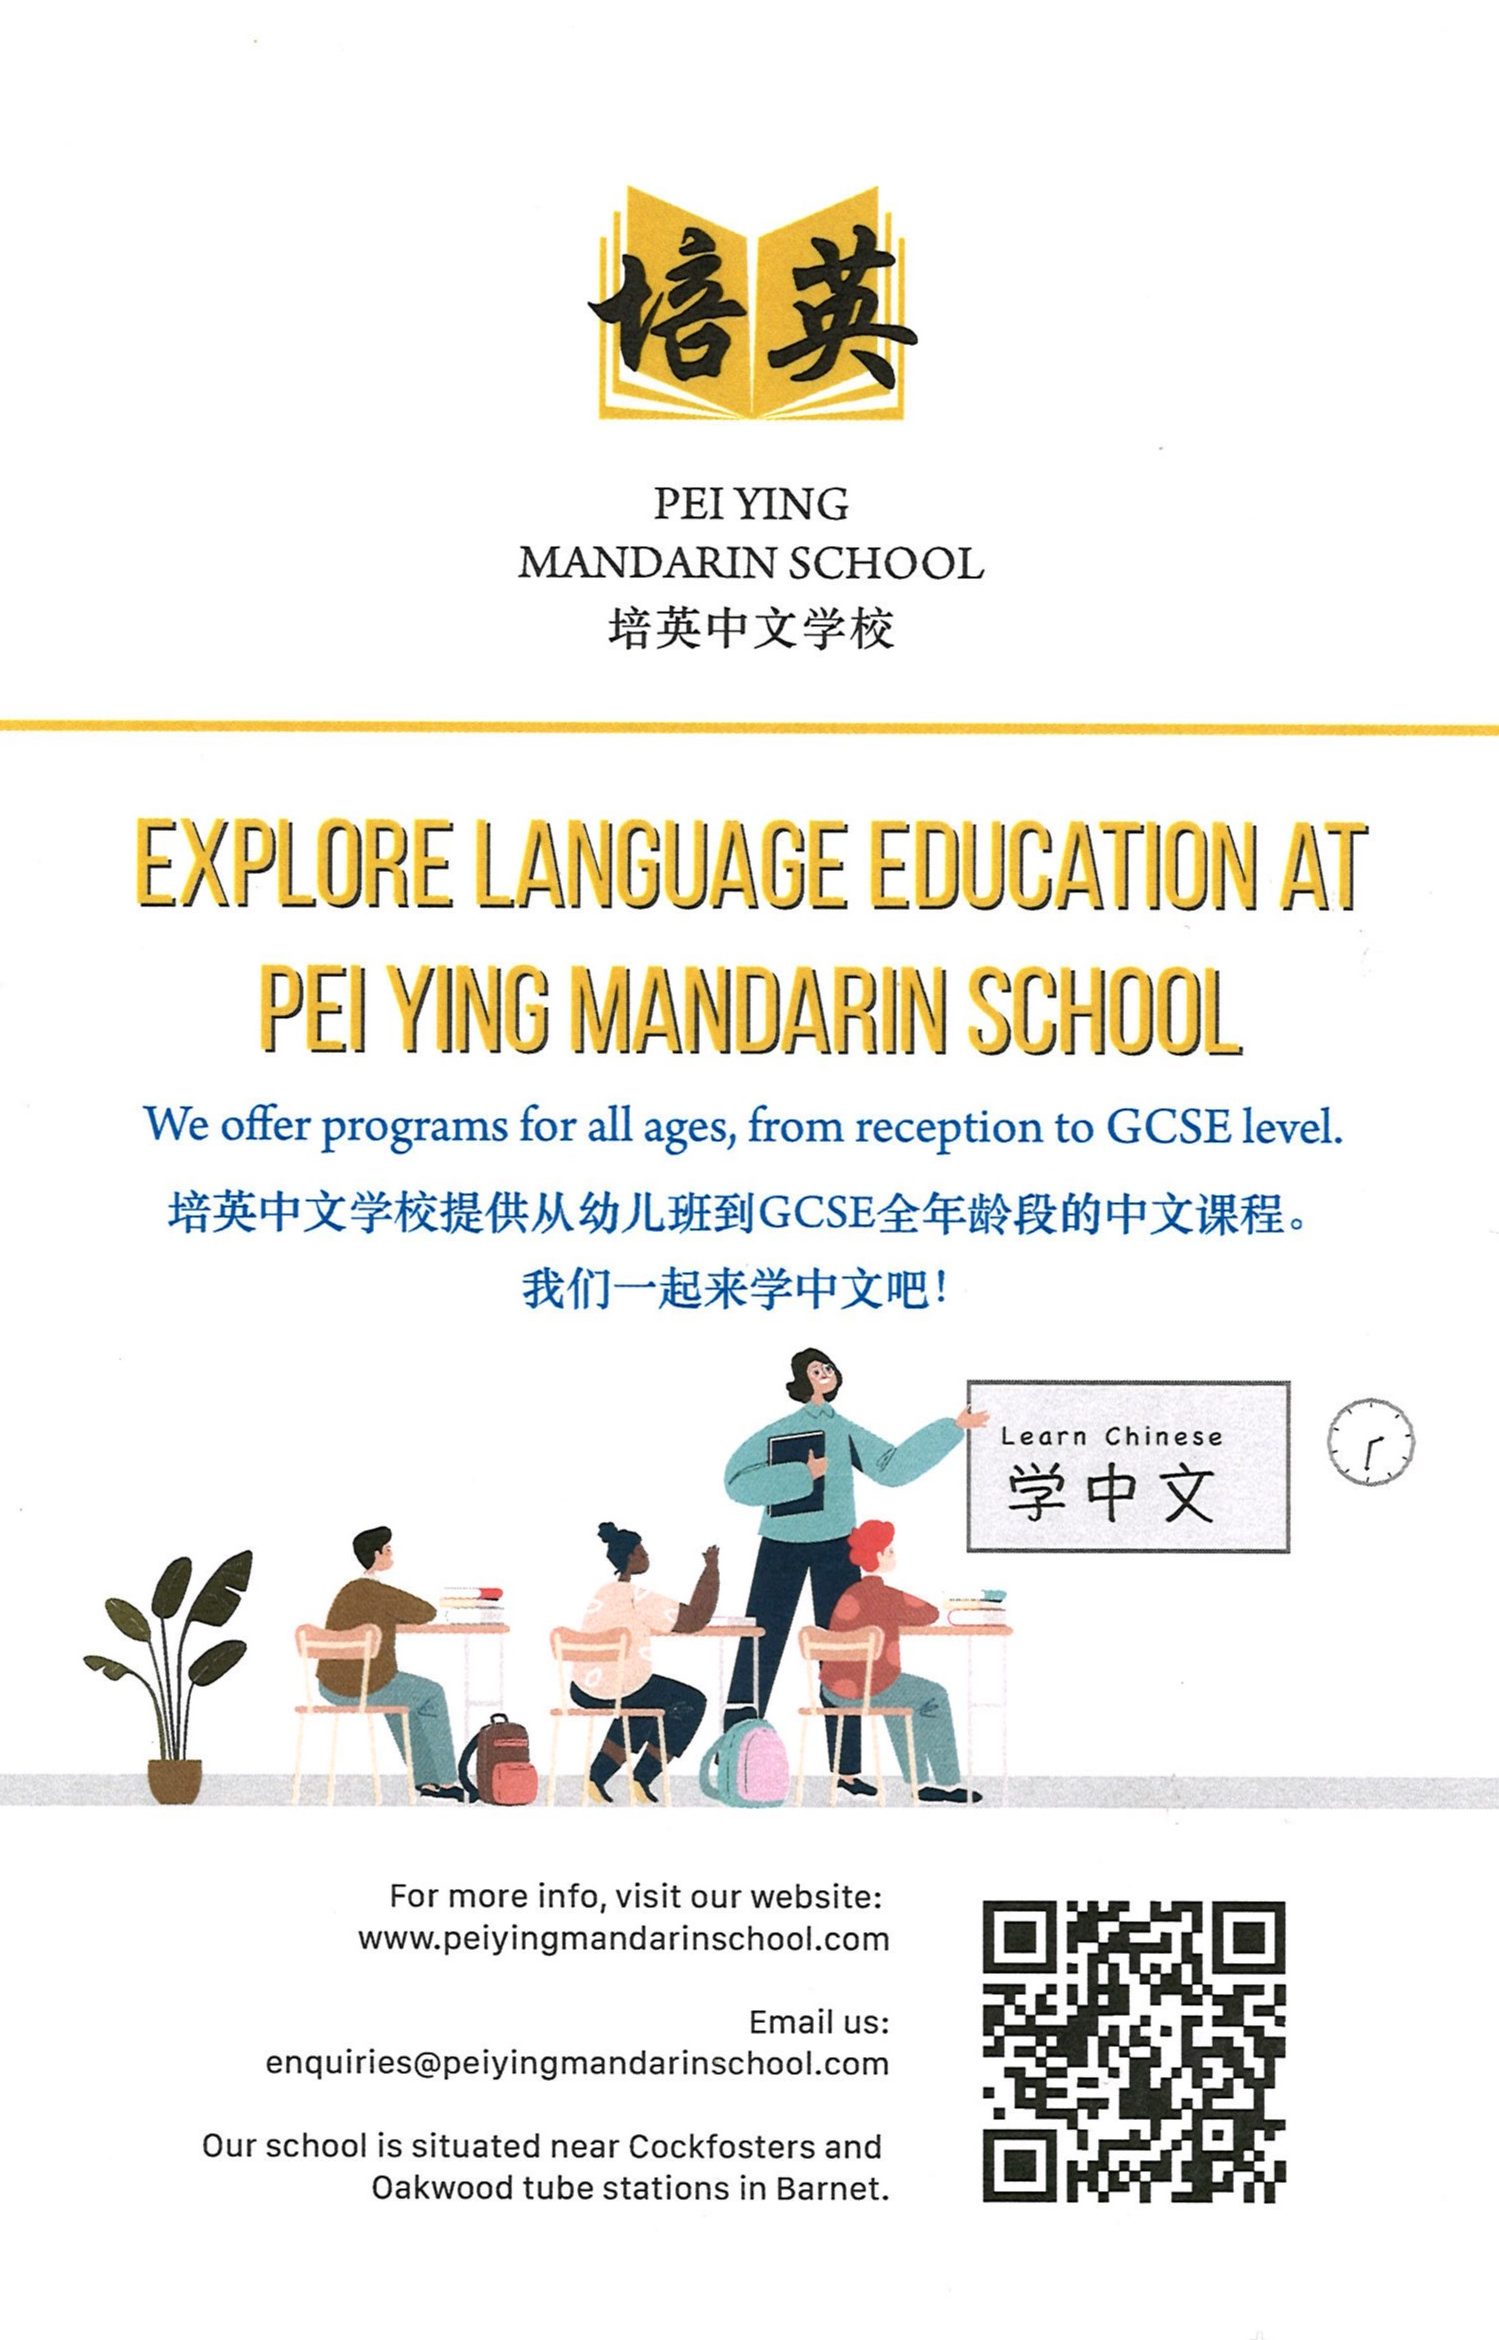 Poster advertising Pei Ying Mandarin School, offering programs for all ages, from reception to GCSE level. The school is situated near Cockfosters and Oakwood tube stations. QR code included.